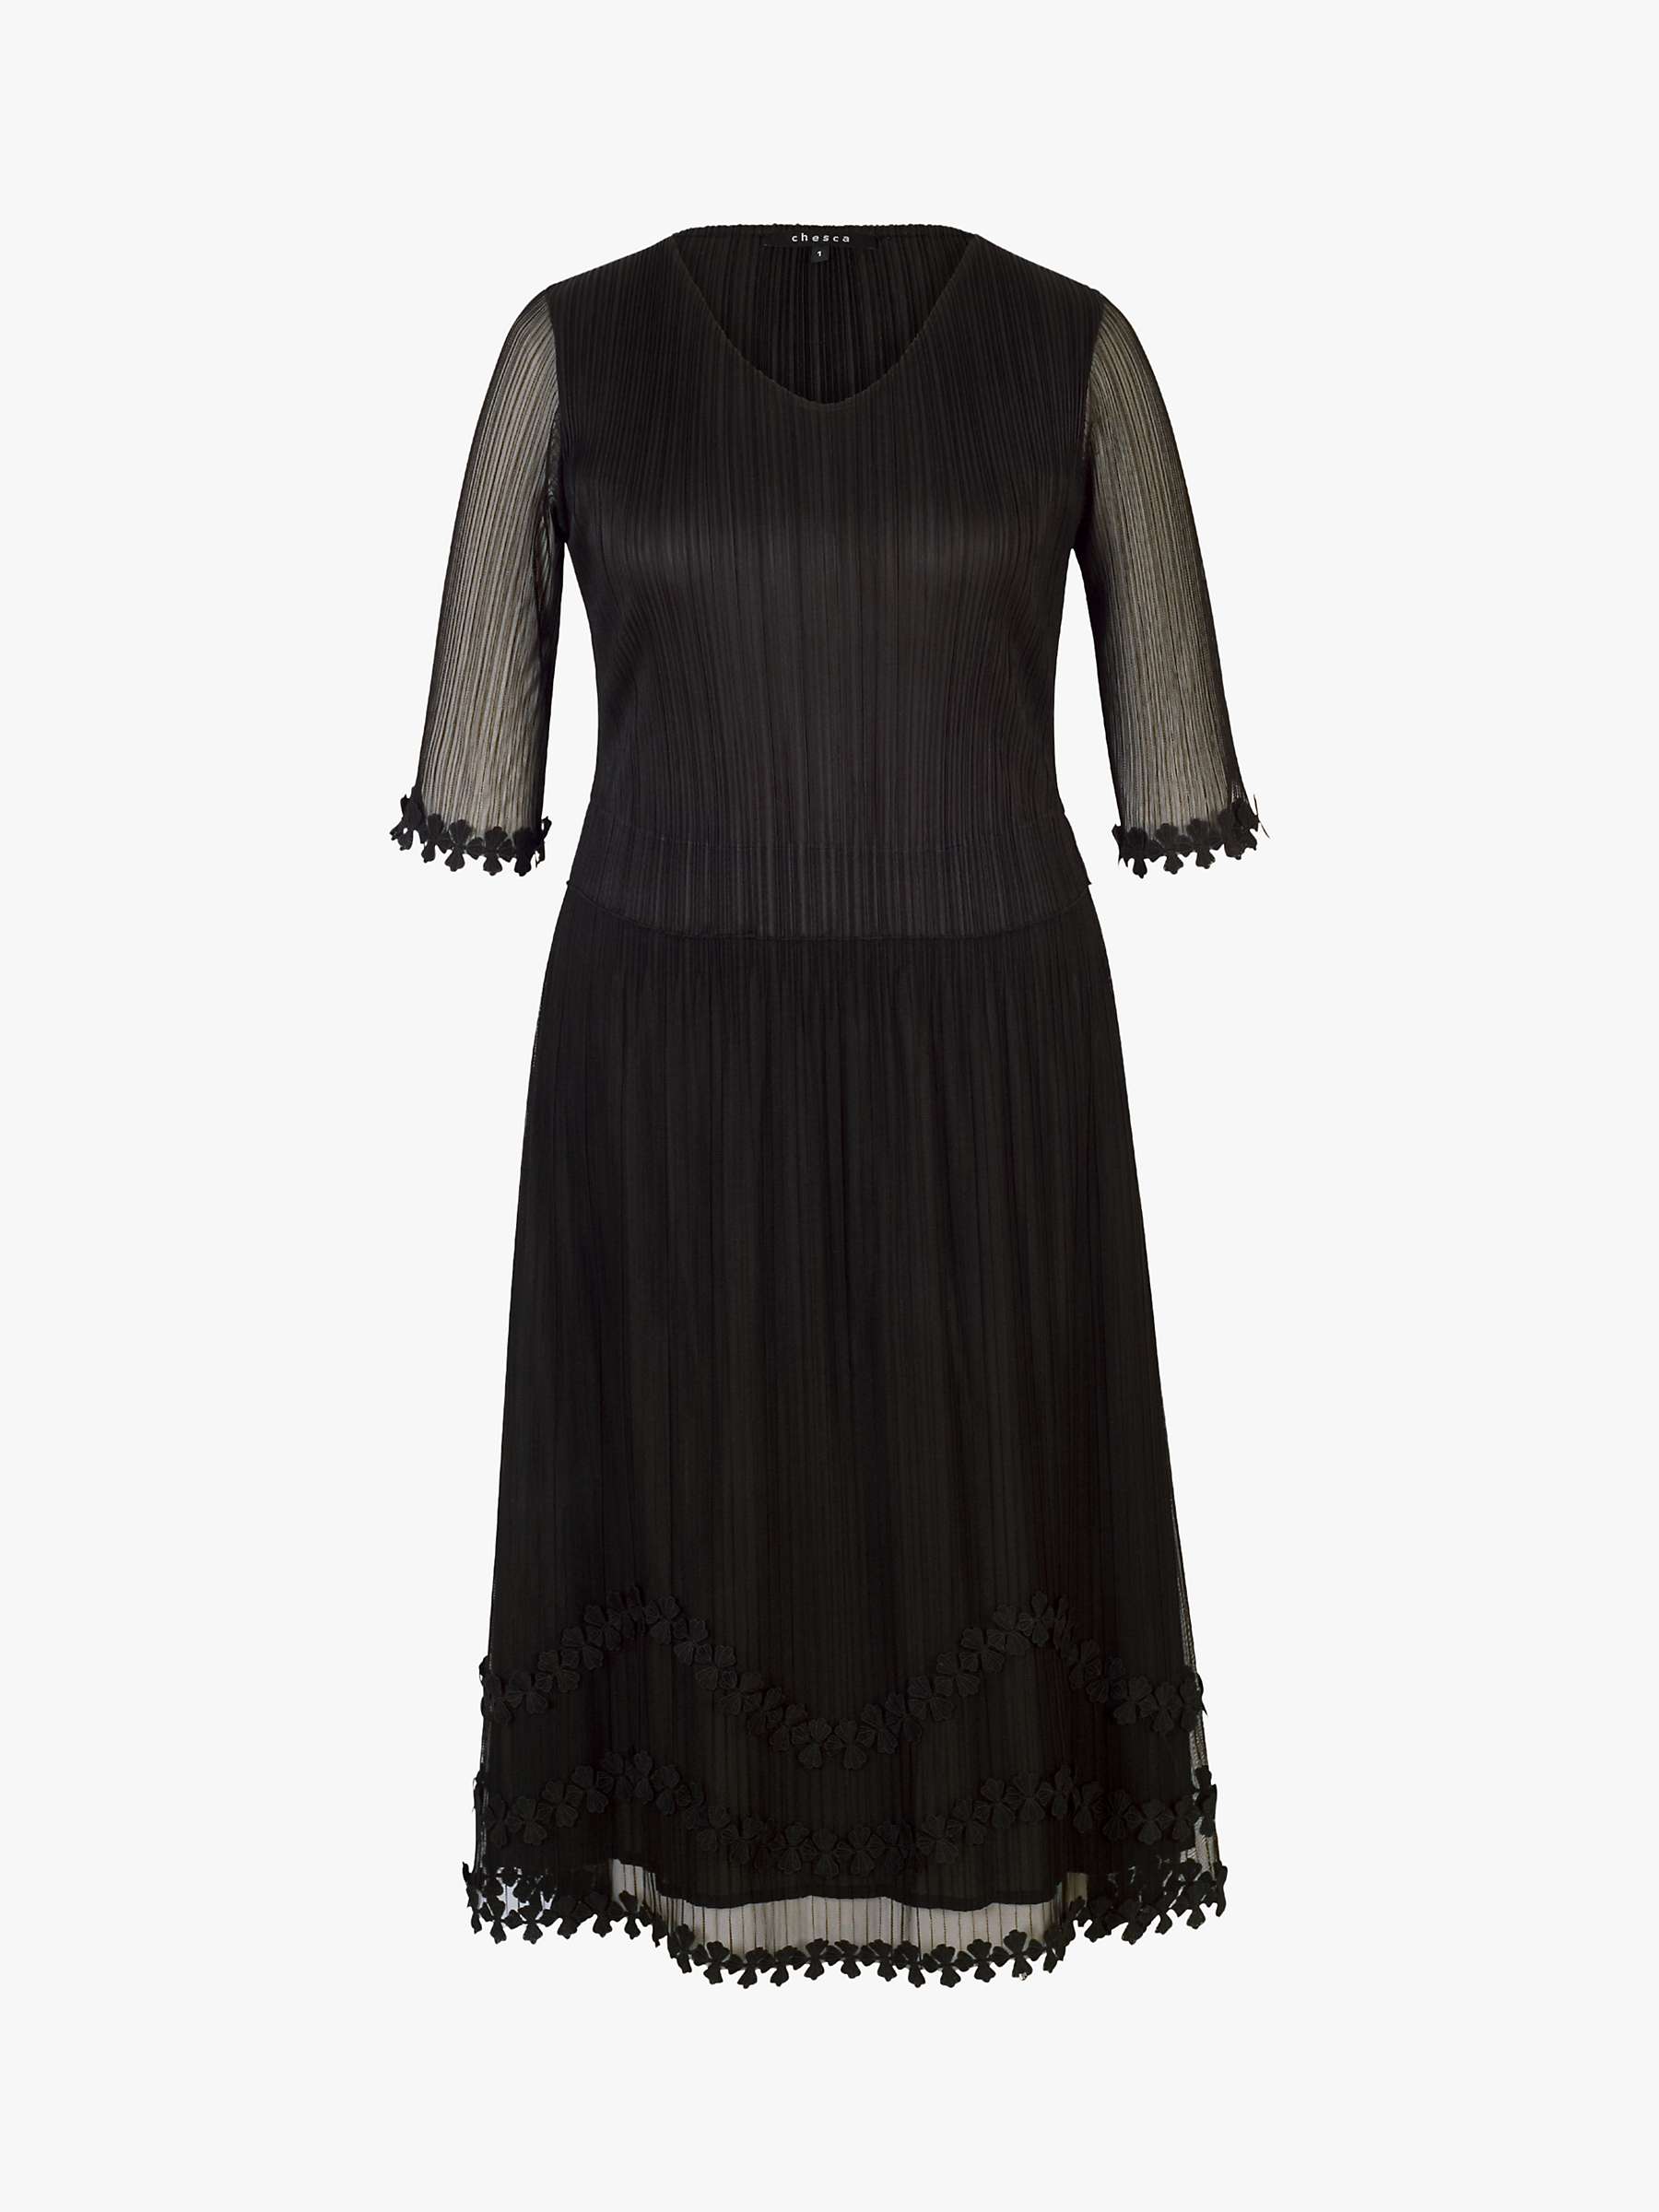 Buy chesca Mock Layer Daisy Chain Trim Pleated Mesh Dress Online at johnlewis.com